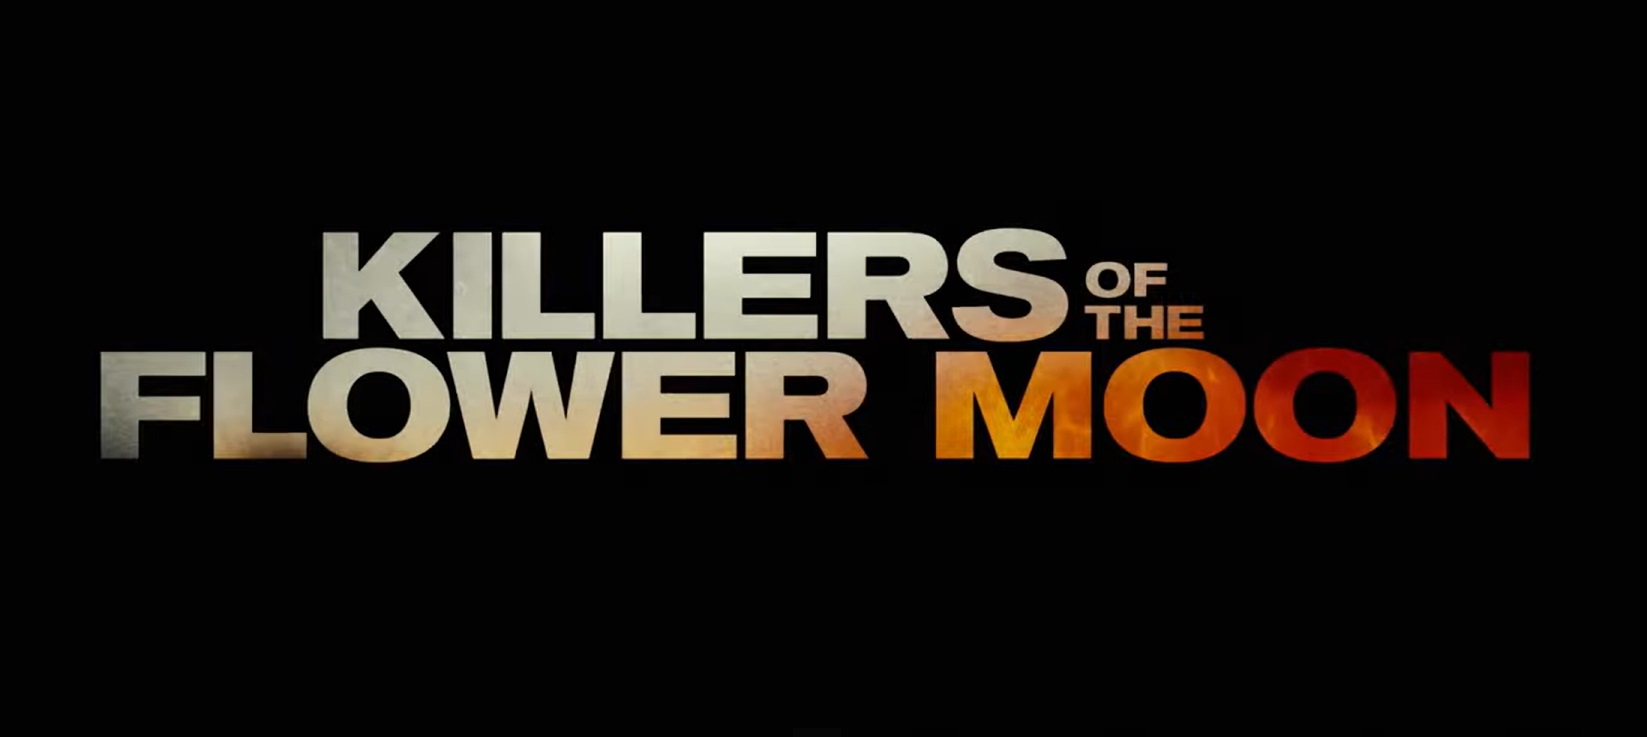 You are currently viewing Killers of the Flower Moon